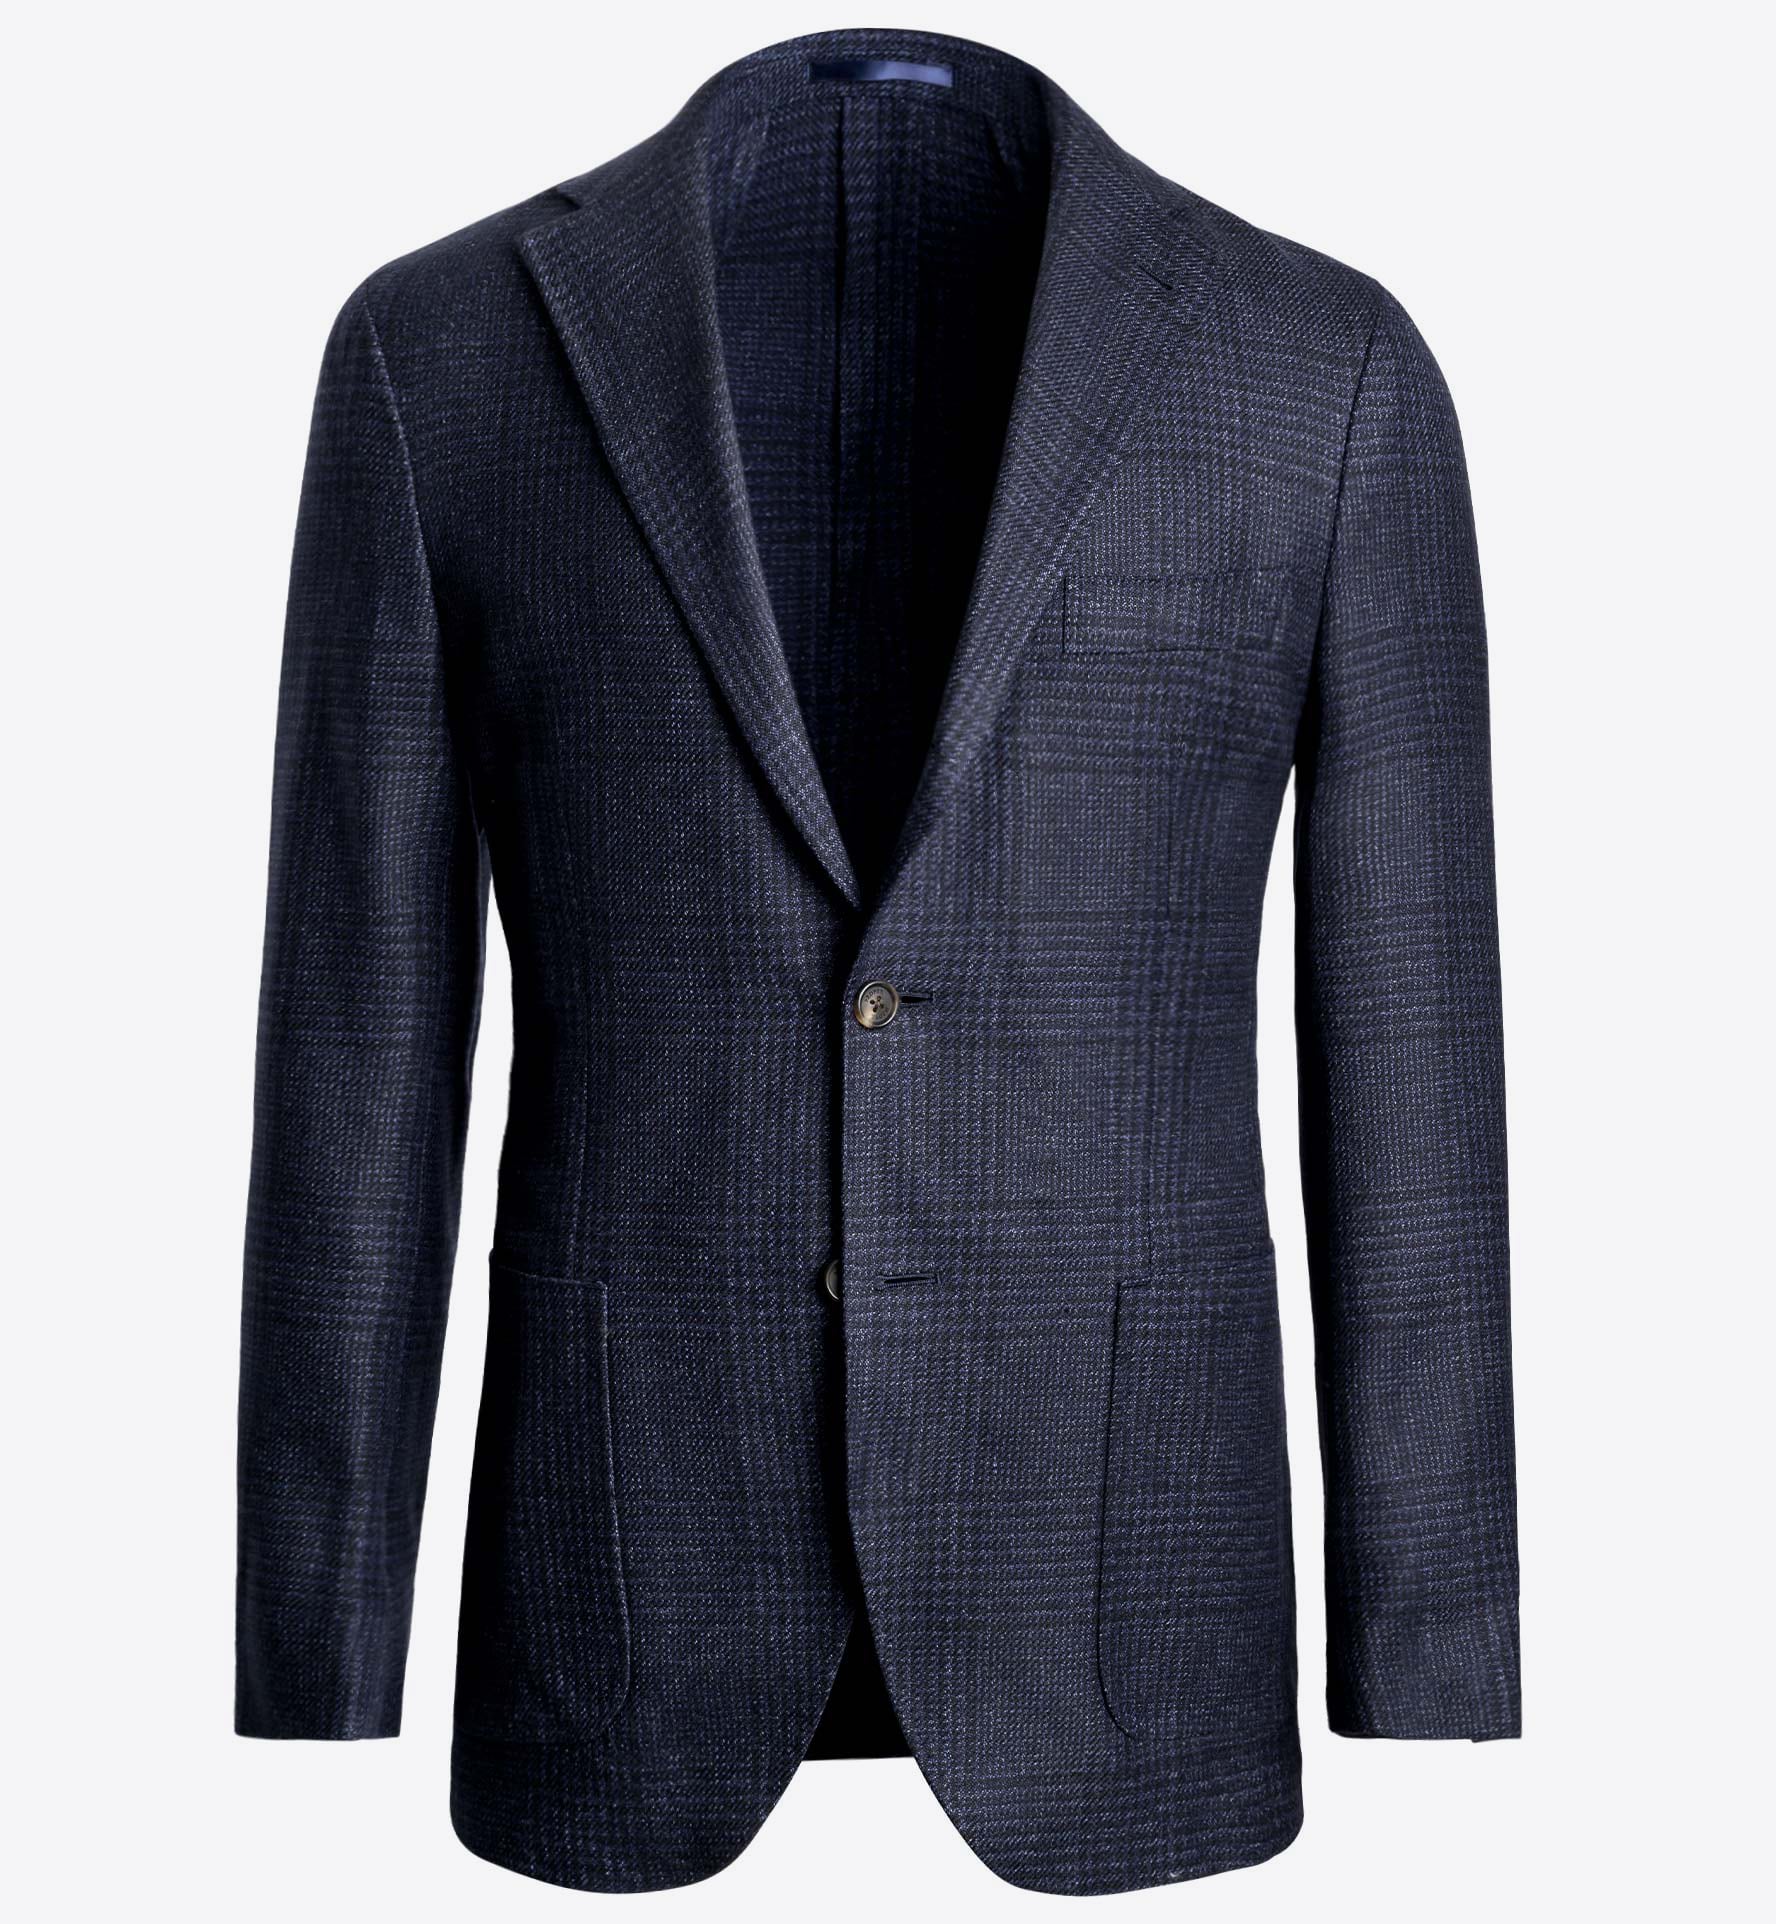 Zoom Image of Waverly Navy Glen Plaid Wool and Linen Jacket